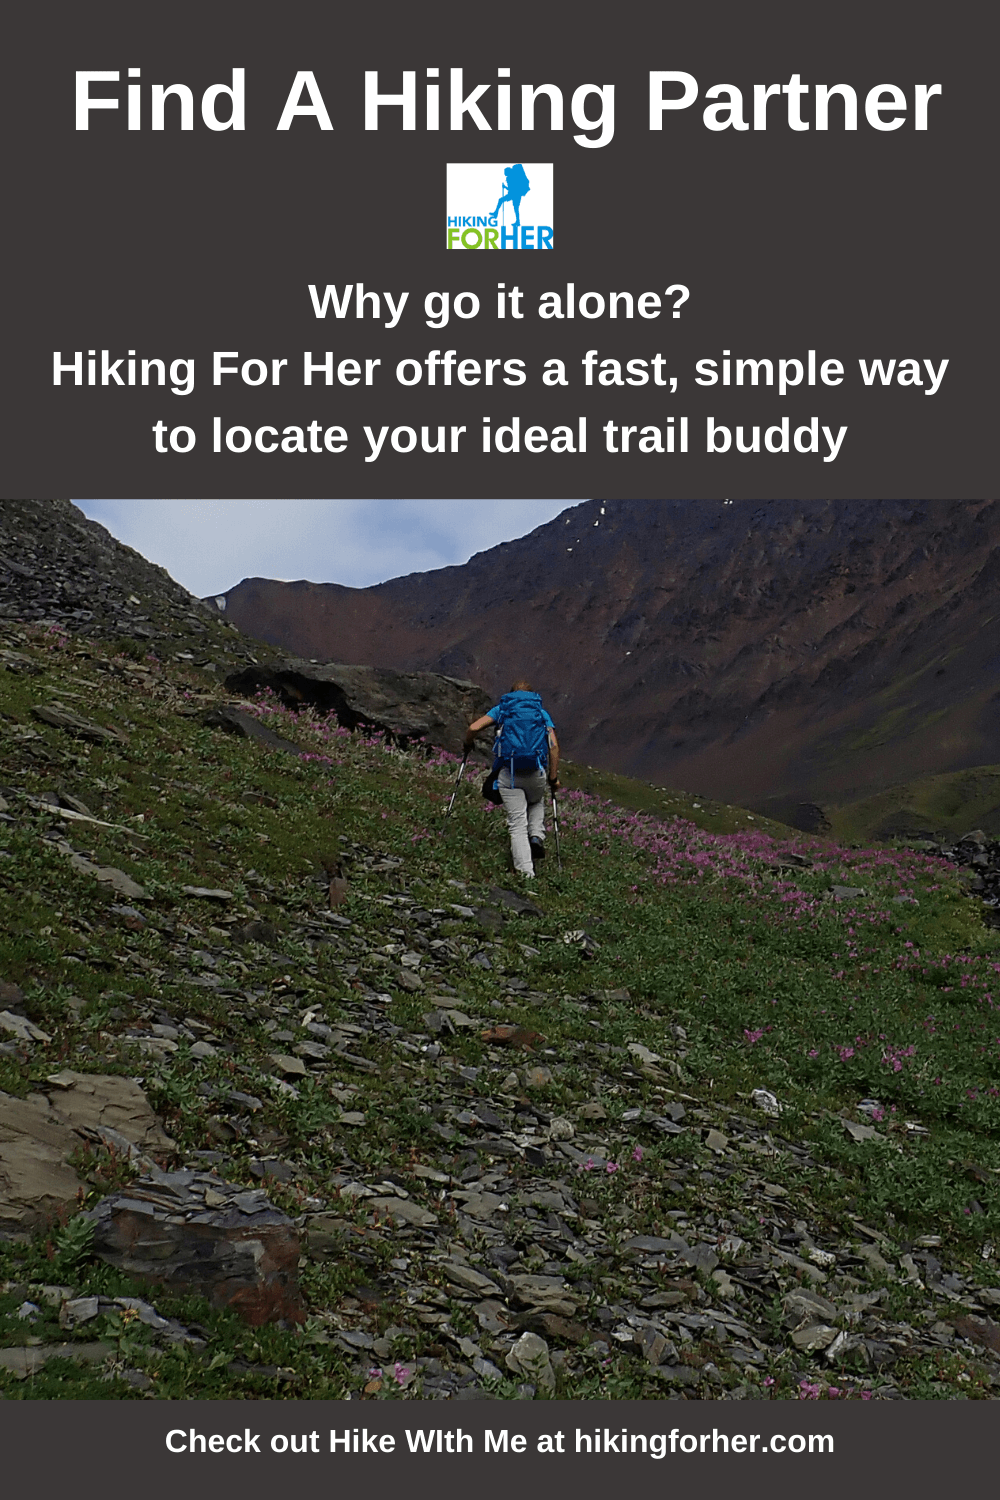 Hike With Me: How To Find An Ideal Hiking Partner For Your Plans